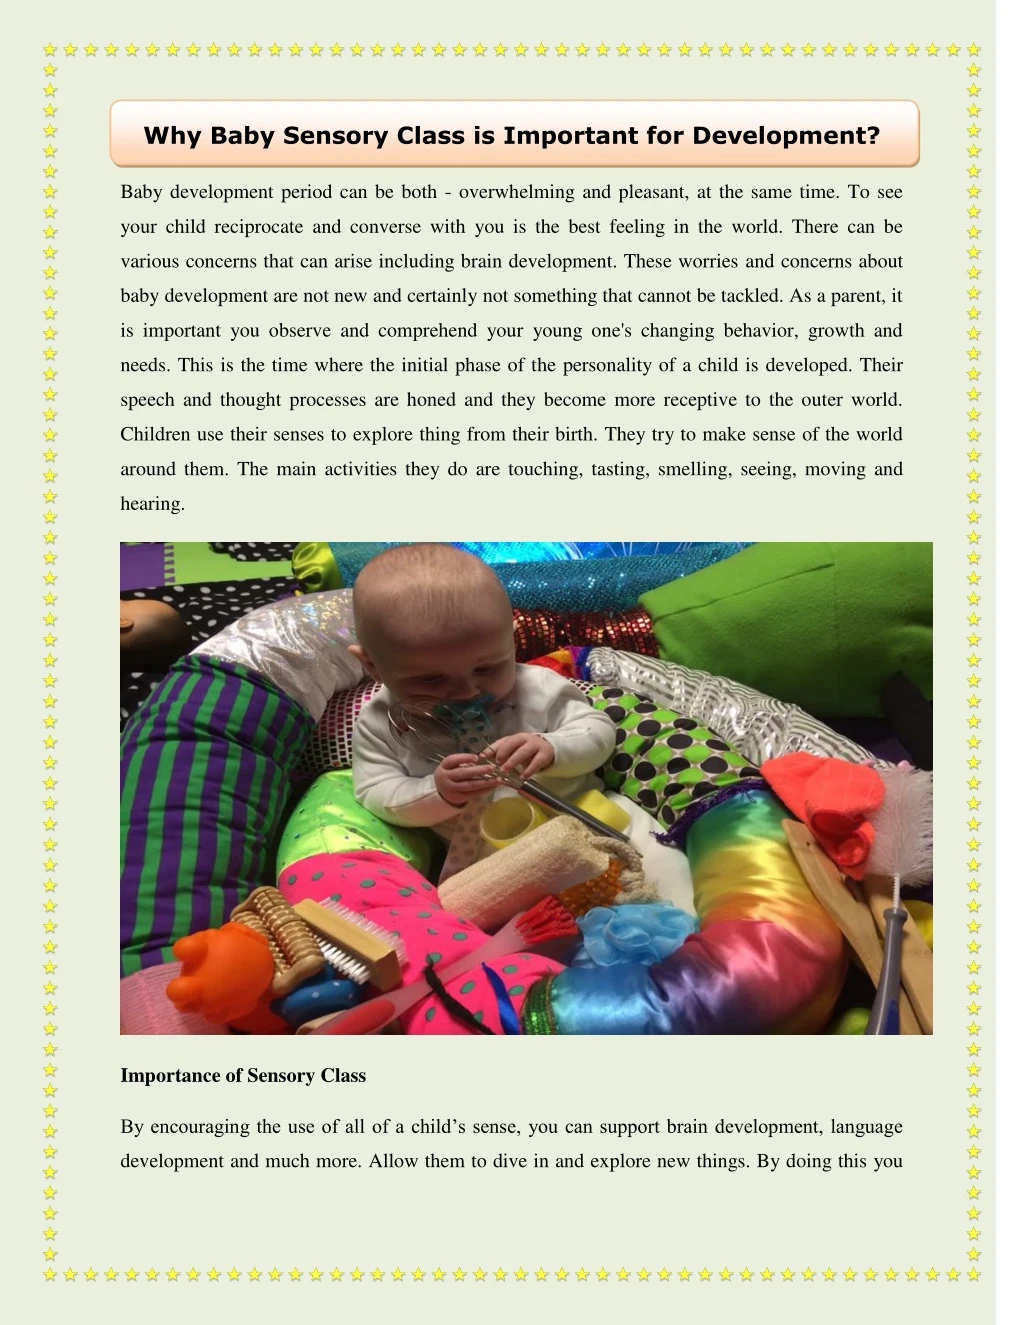 why baby sensory class is important